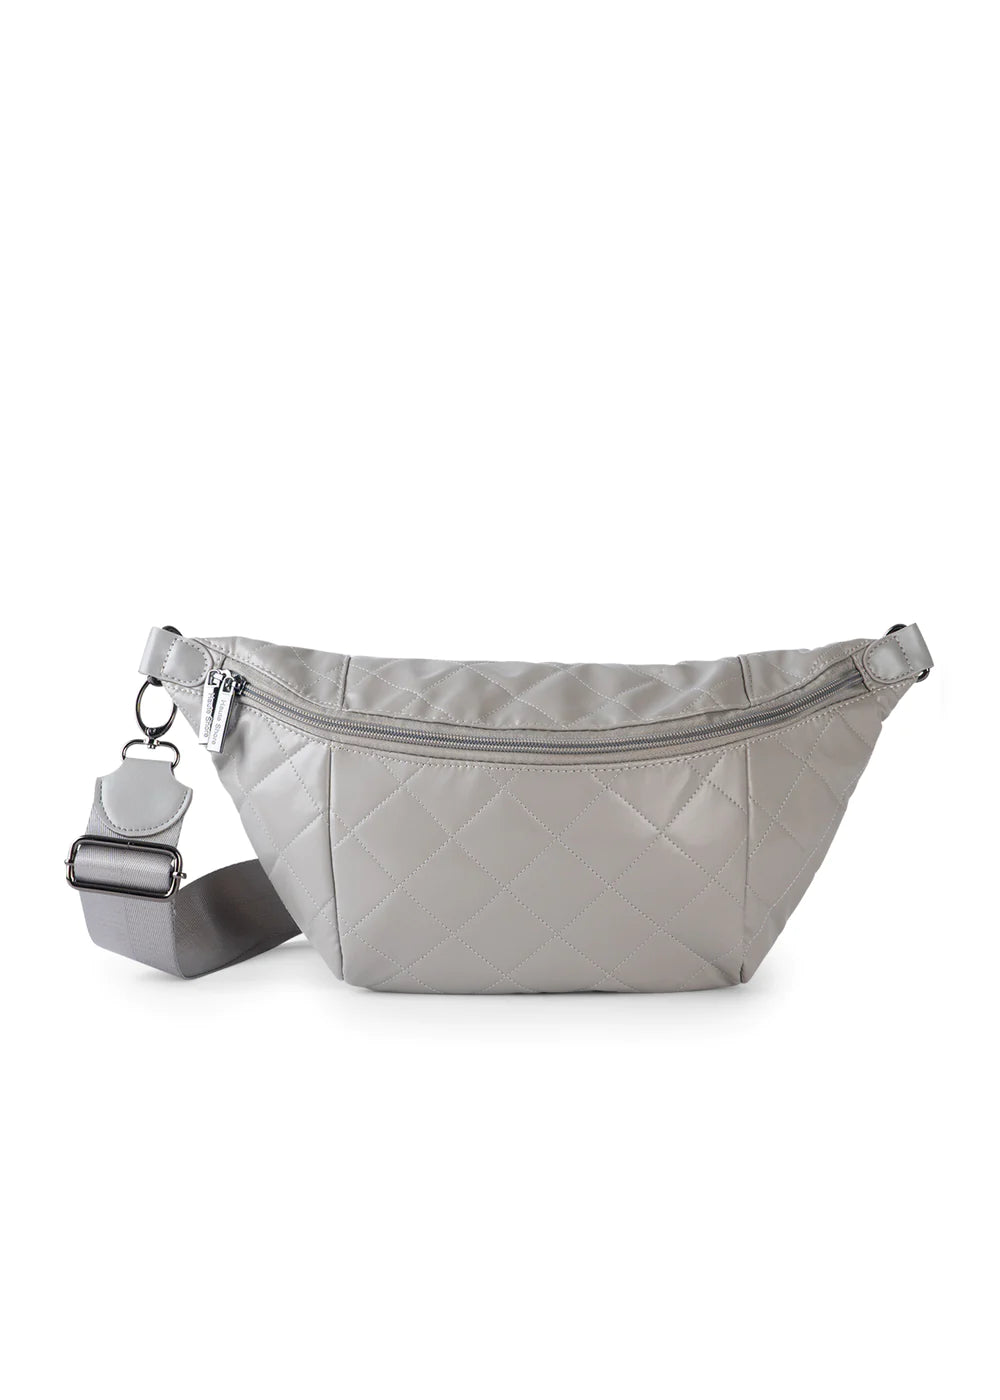 Emily Quilted Sling Bag - Stone Vegan Leather